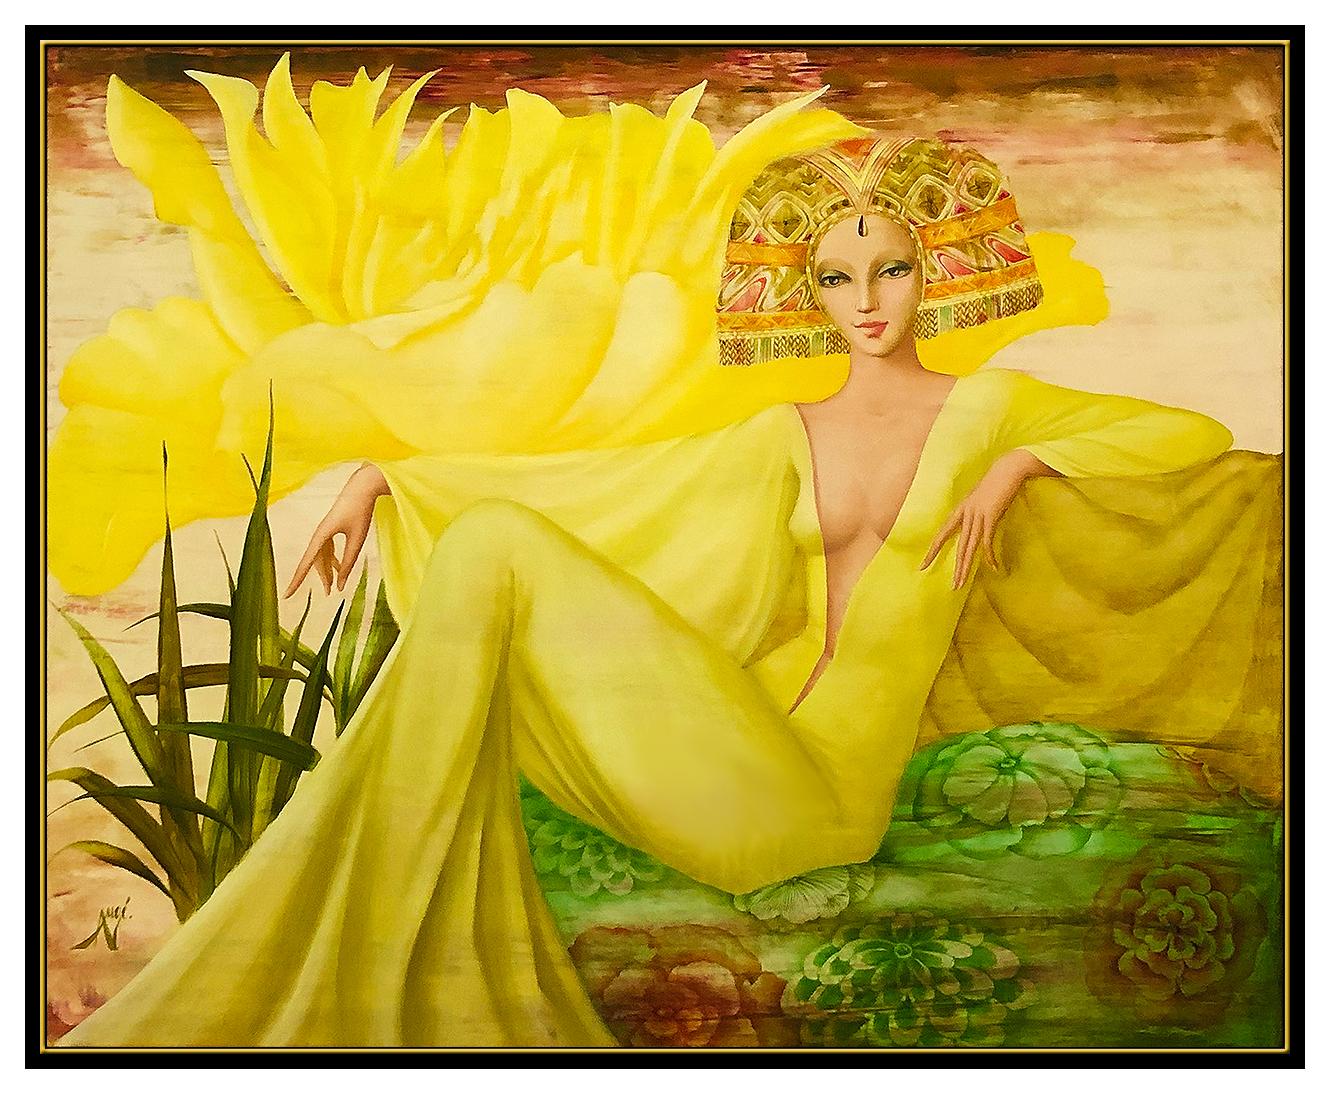 Philippe Auge Authentic & Large Original Oil Painting on Canvas, Professionally Custom Framed, and listed with the Submit Best Offer option

Accepting Offers Now: The item up for sale is a spectacular and Original Oil Painting on Canvas by Legendary